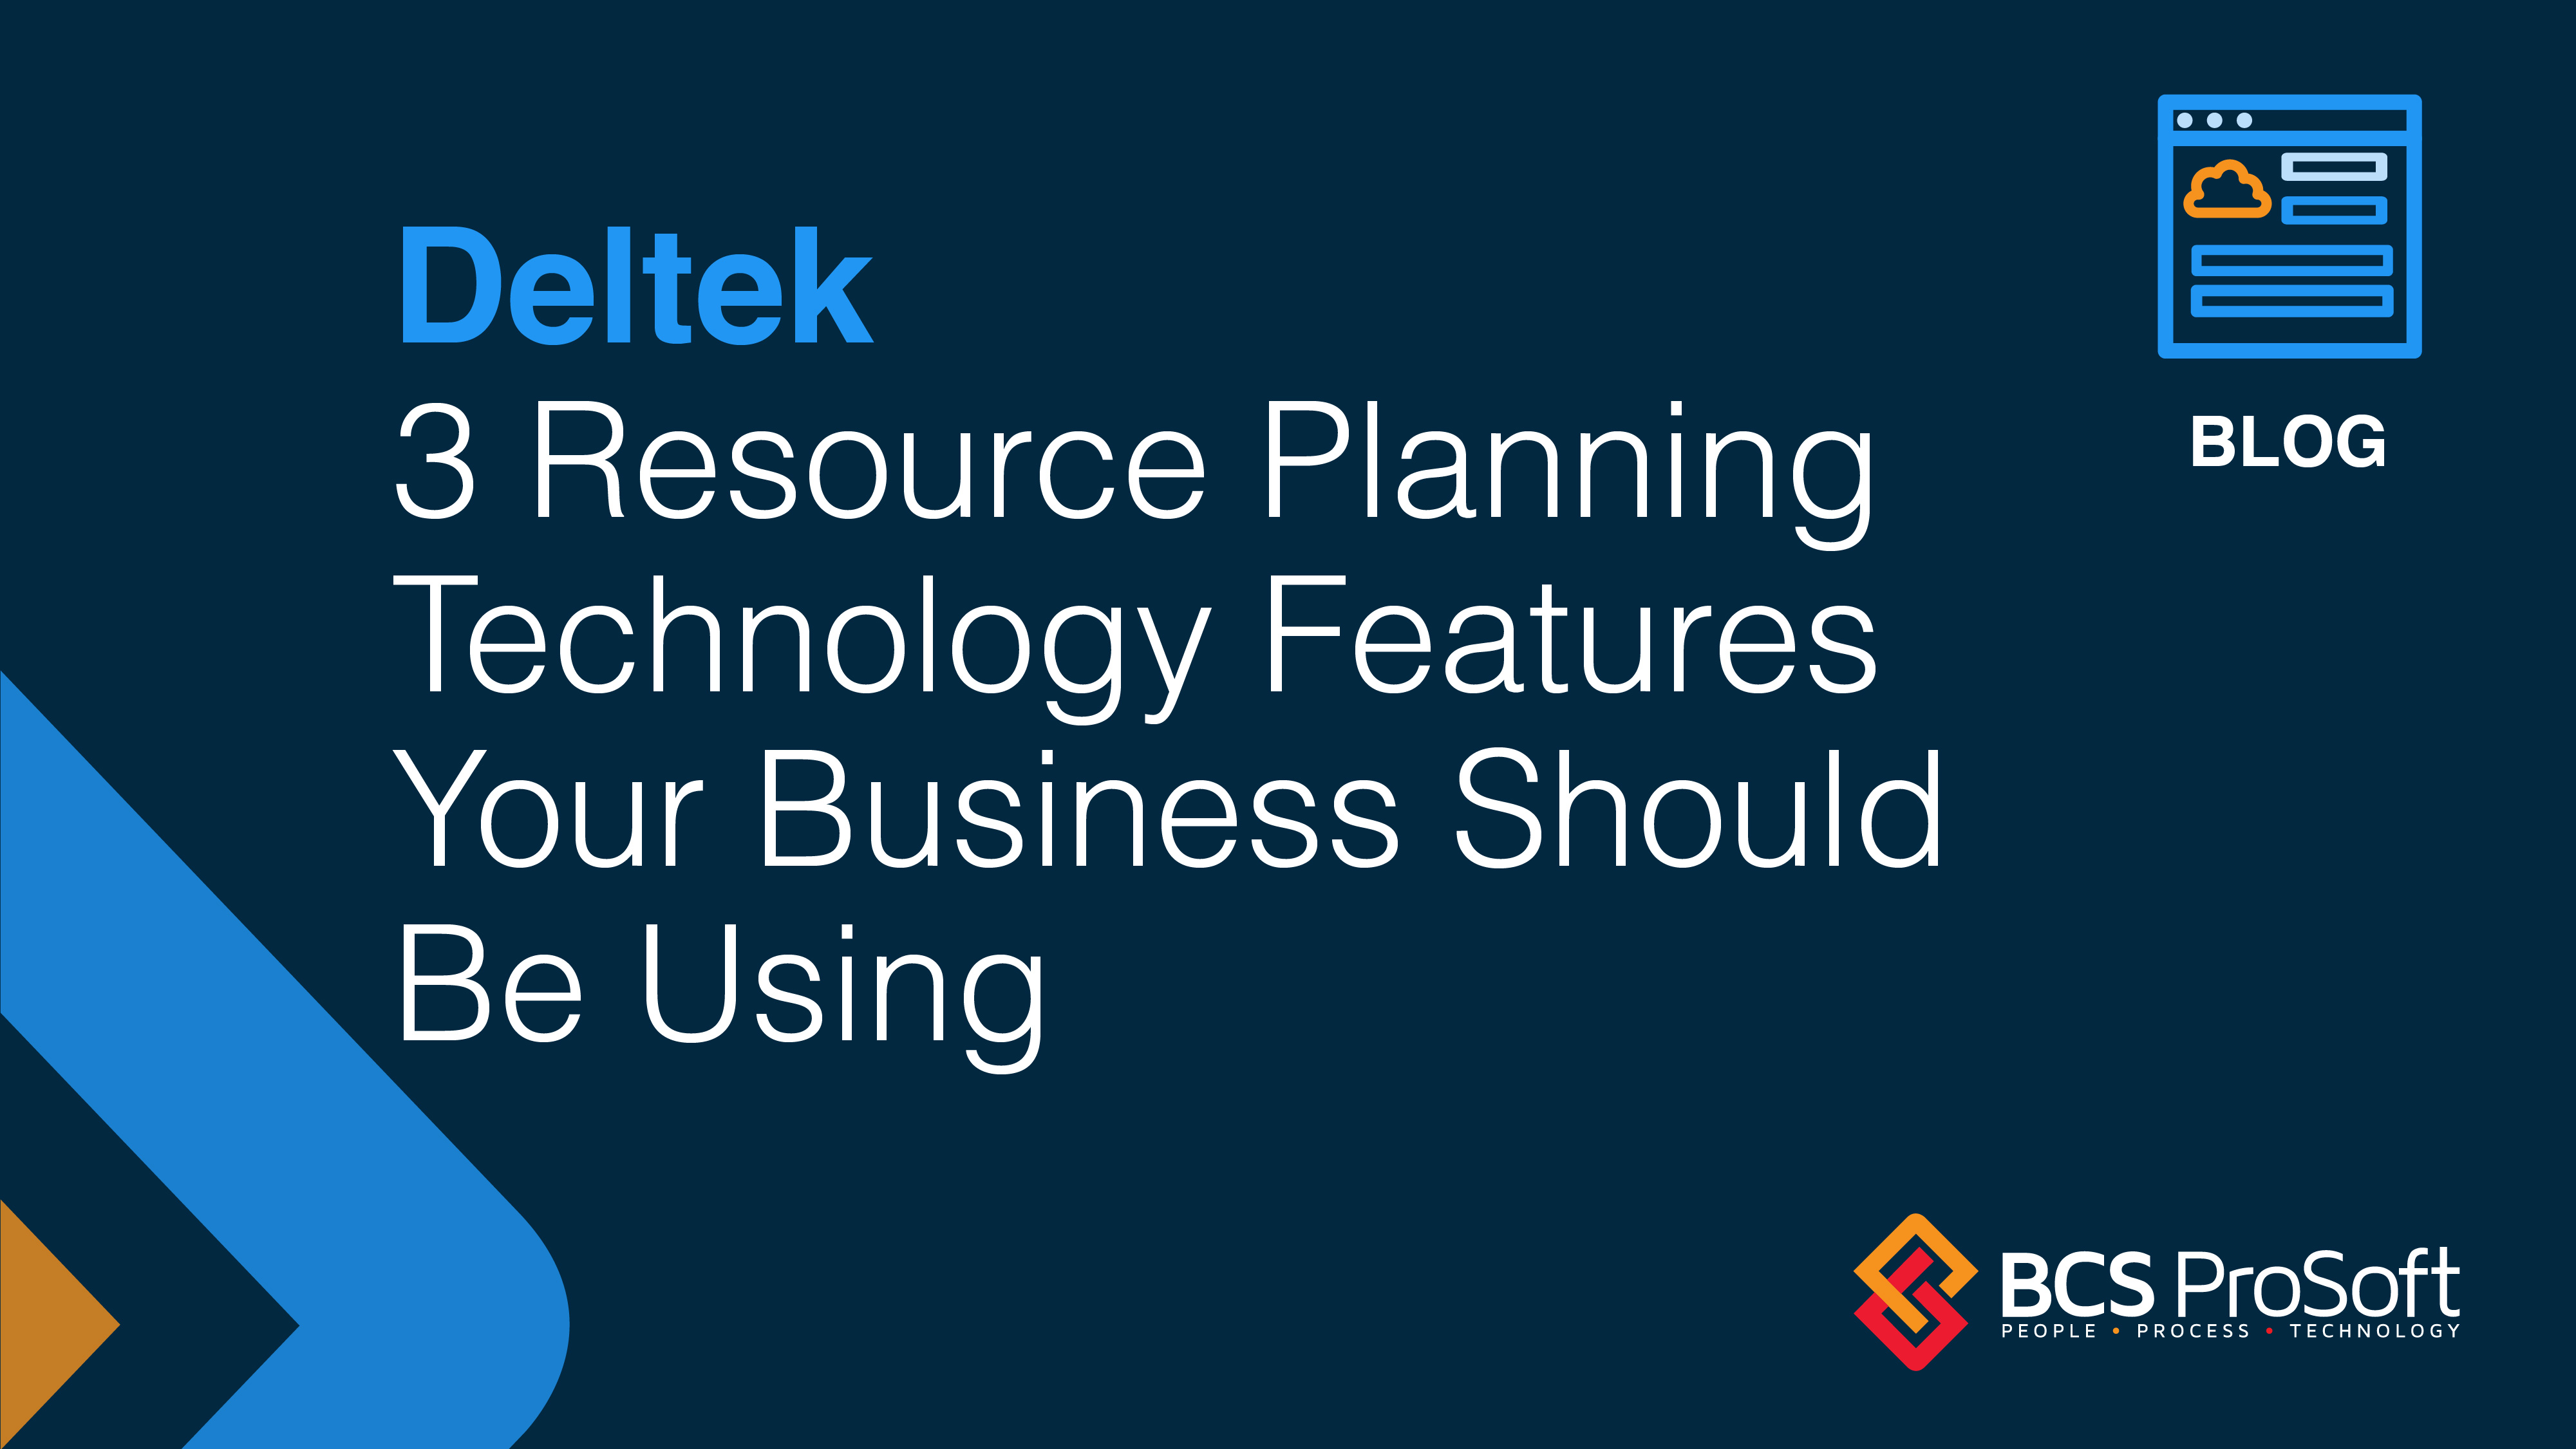 blog-thumbnail-deltek-3-resource-planning-technology-features-your-business-should-be-using-bcs-04